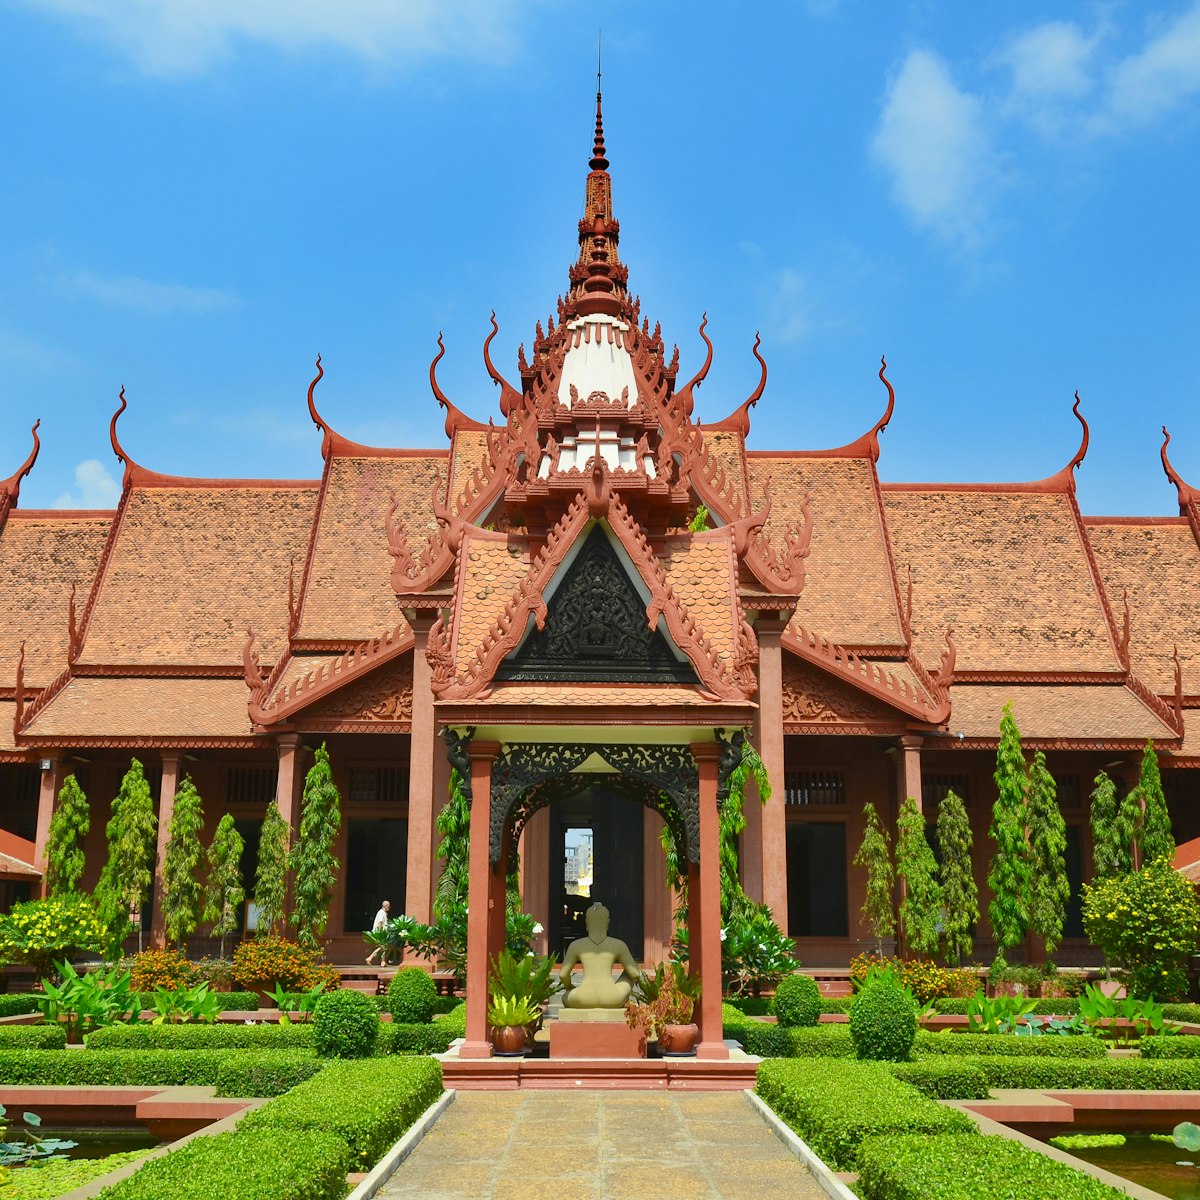 The National Museum of Cambodia (Sala Rachana) in Phnom Penh is Cambodia's largest museum of cultural history and is the country's leading historical and archaeological museum.